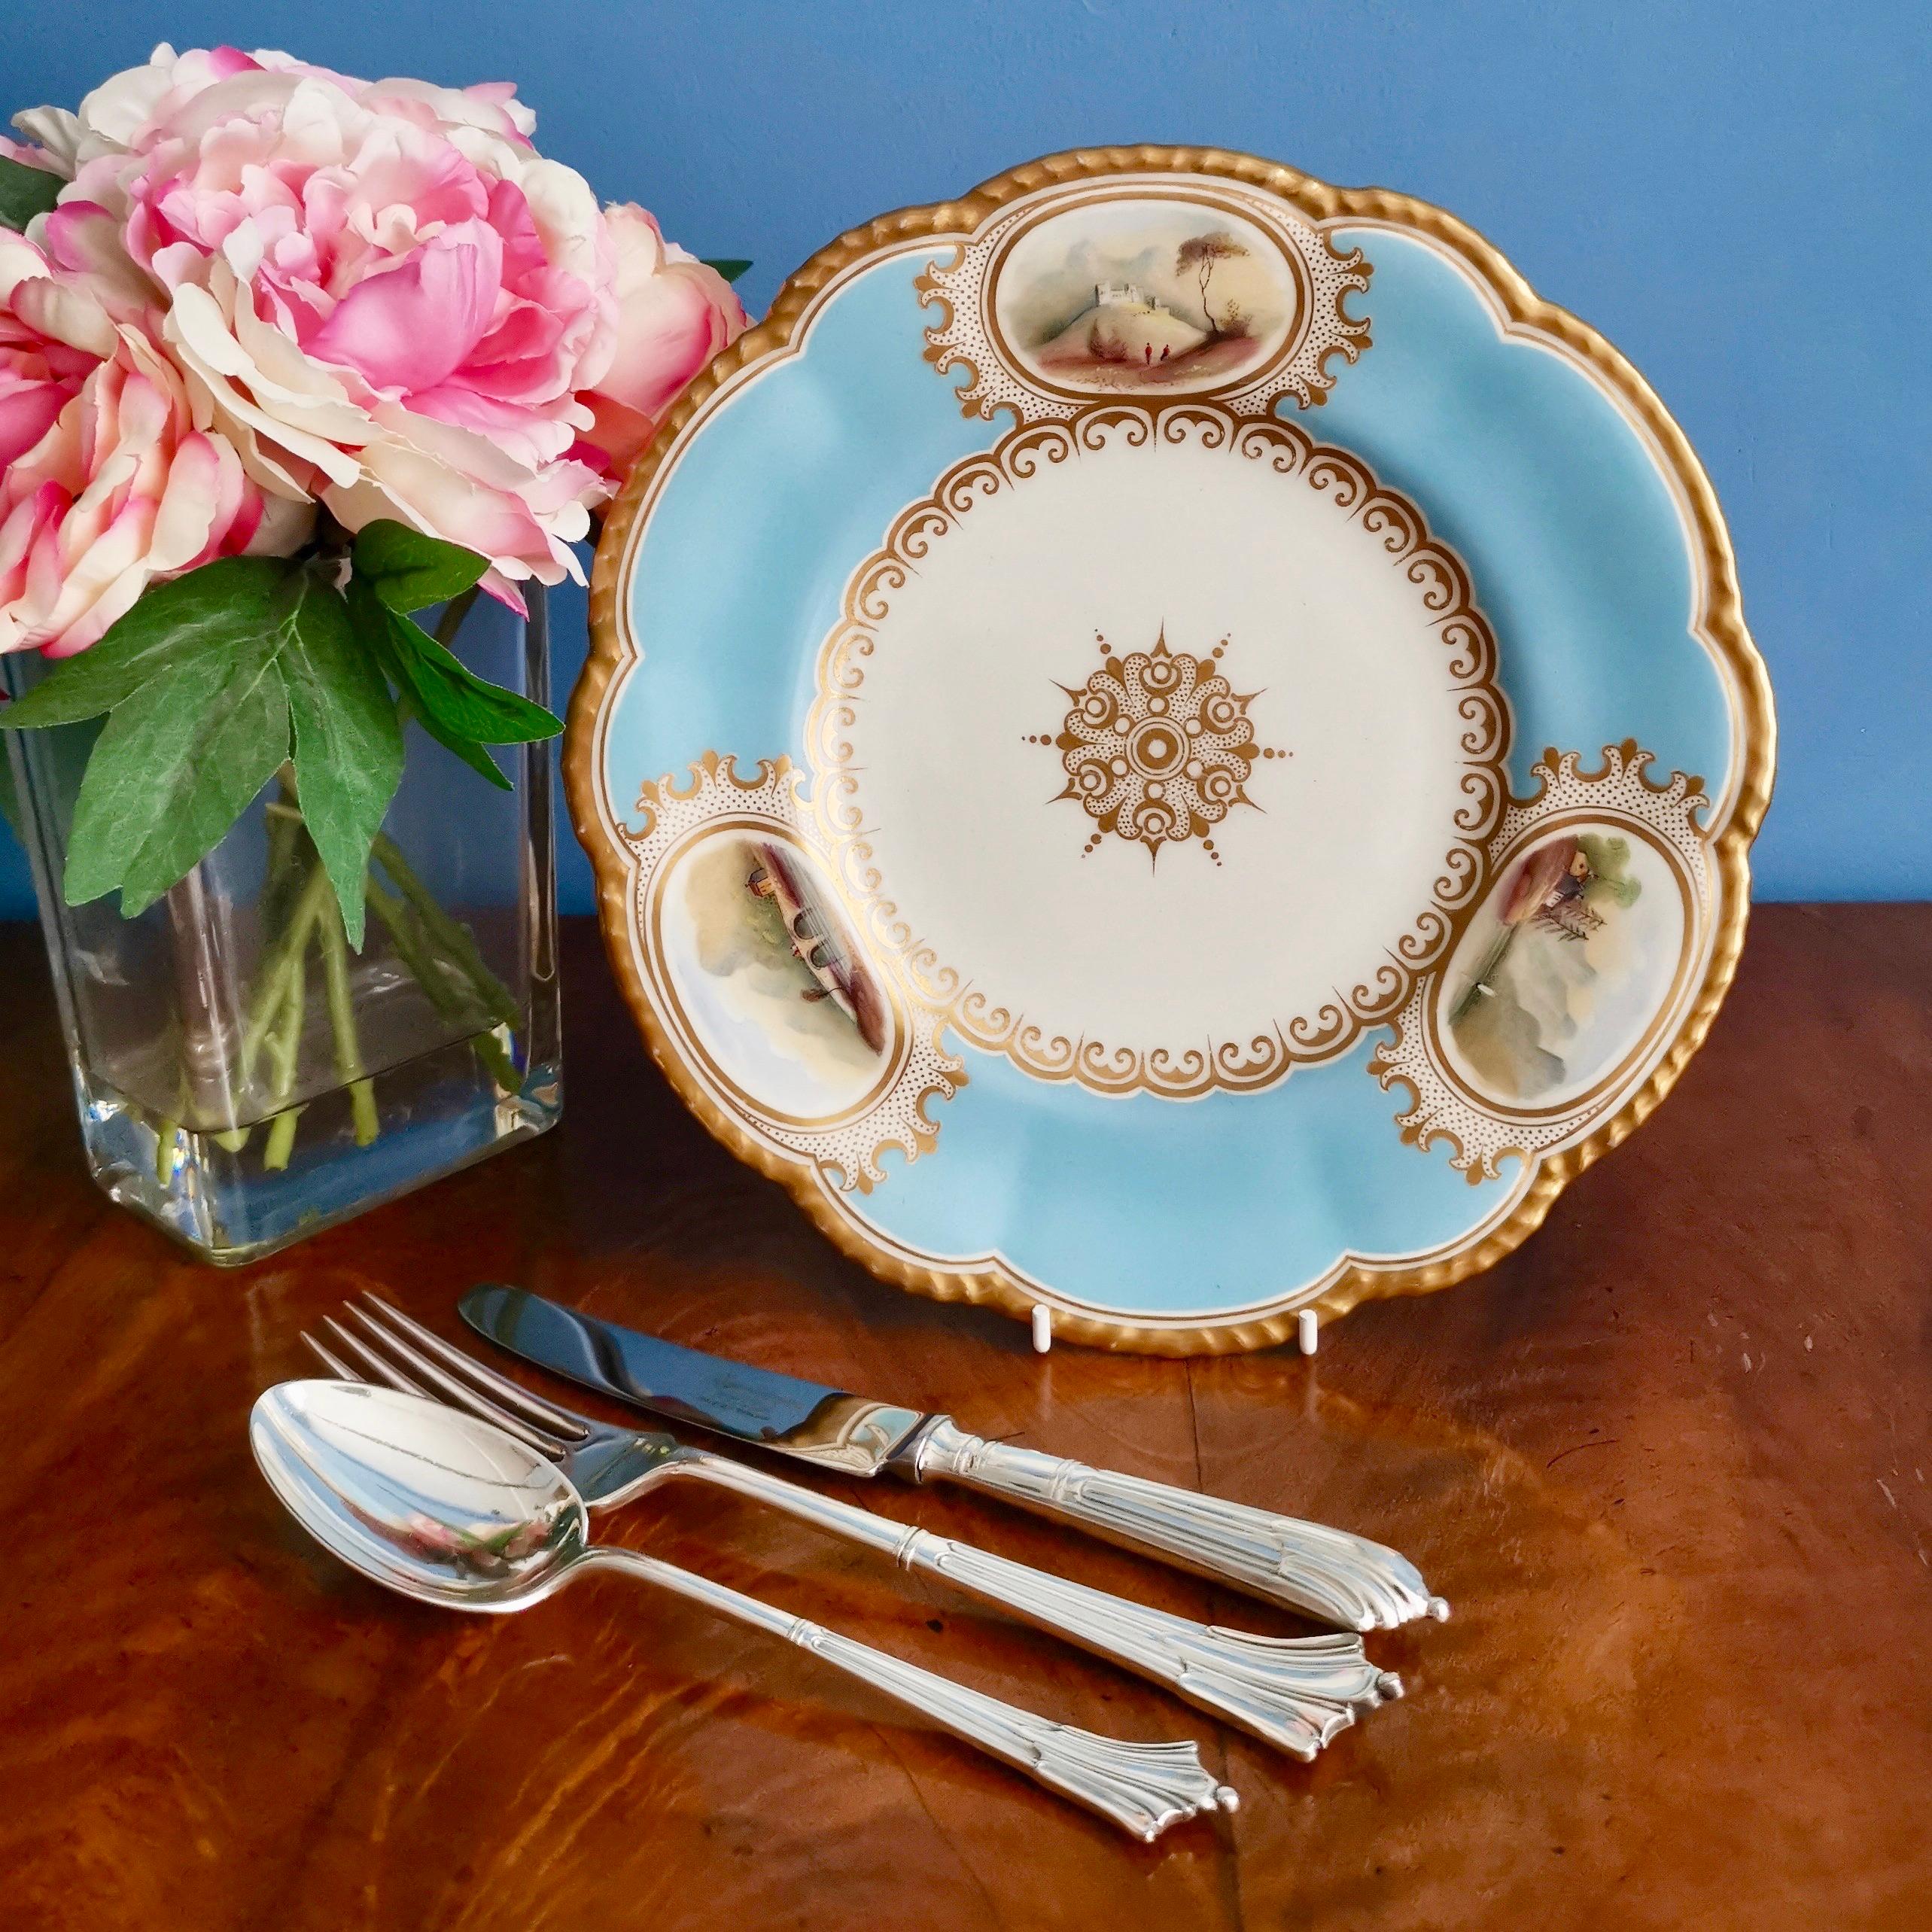 This is a beautiful dessert plate produced by Grainger & Co in Worcester in 1850, which was the Victorian era, circa 1850. The plate is decorated with a sky blue ground, a gilded gadrooned edge and three beautiful hand painted landscapes in white